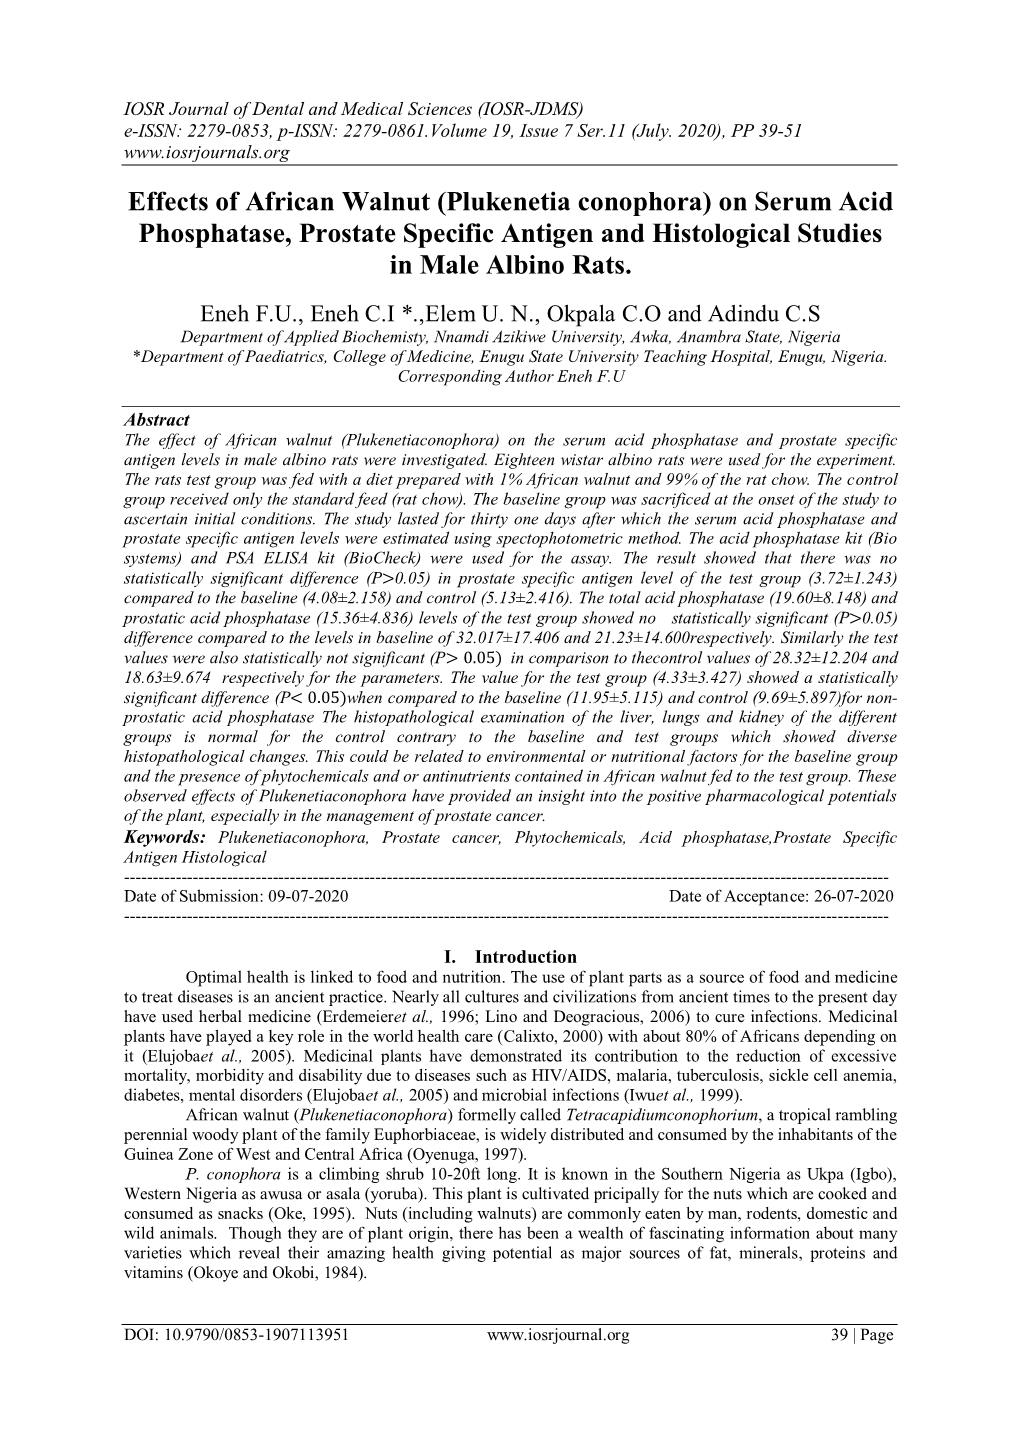 Effects of African Walnut (Plukenetia Conophora) on Serum Acid Phosphatase, Prostate Specific Antigen and Histological Studies in Male Albino Rats